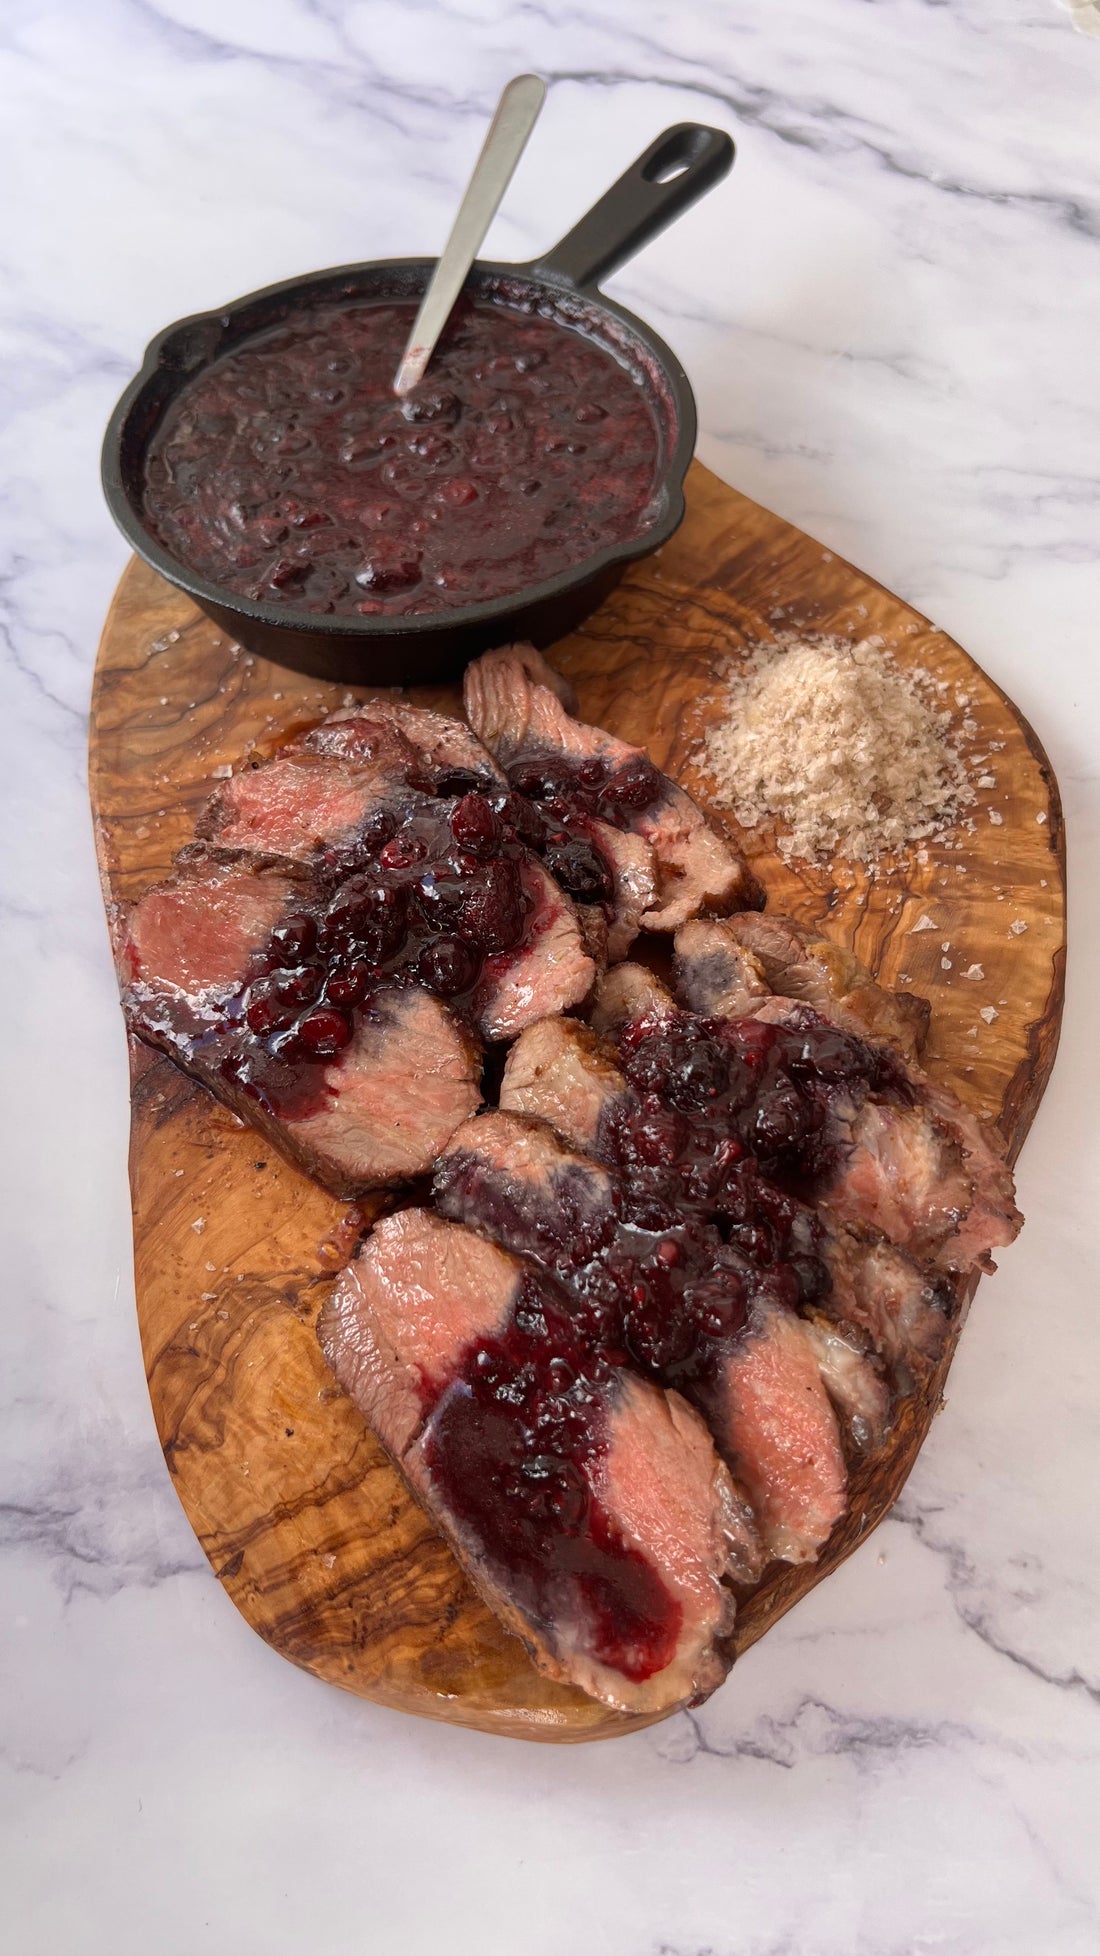 Try this iberico presa recipe, it will delight your guests!